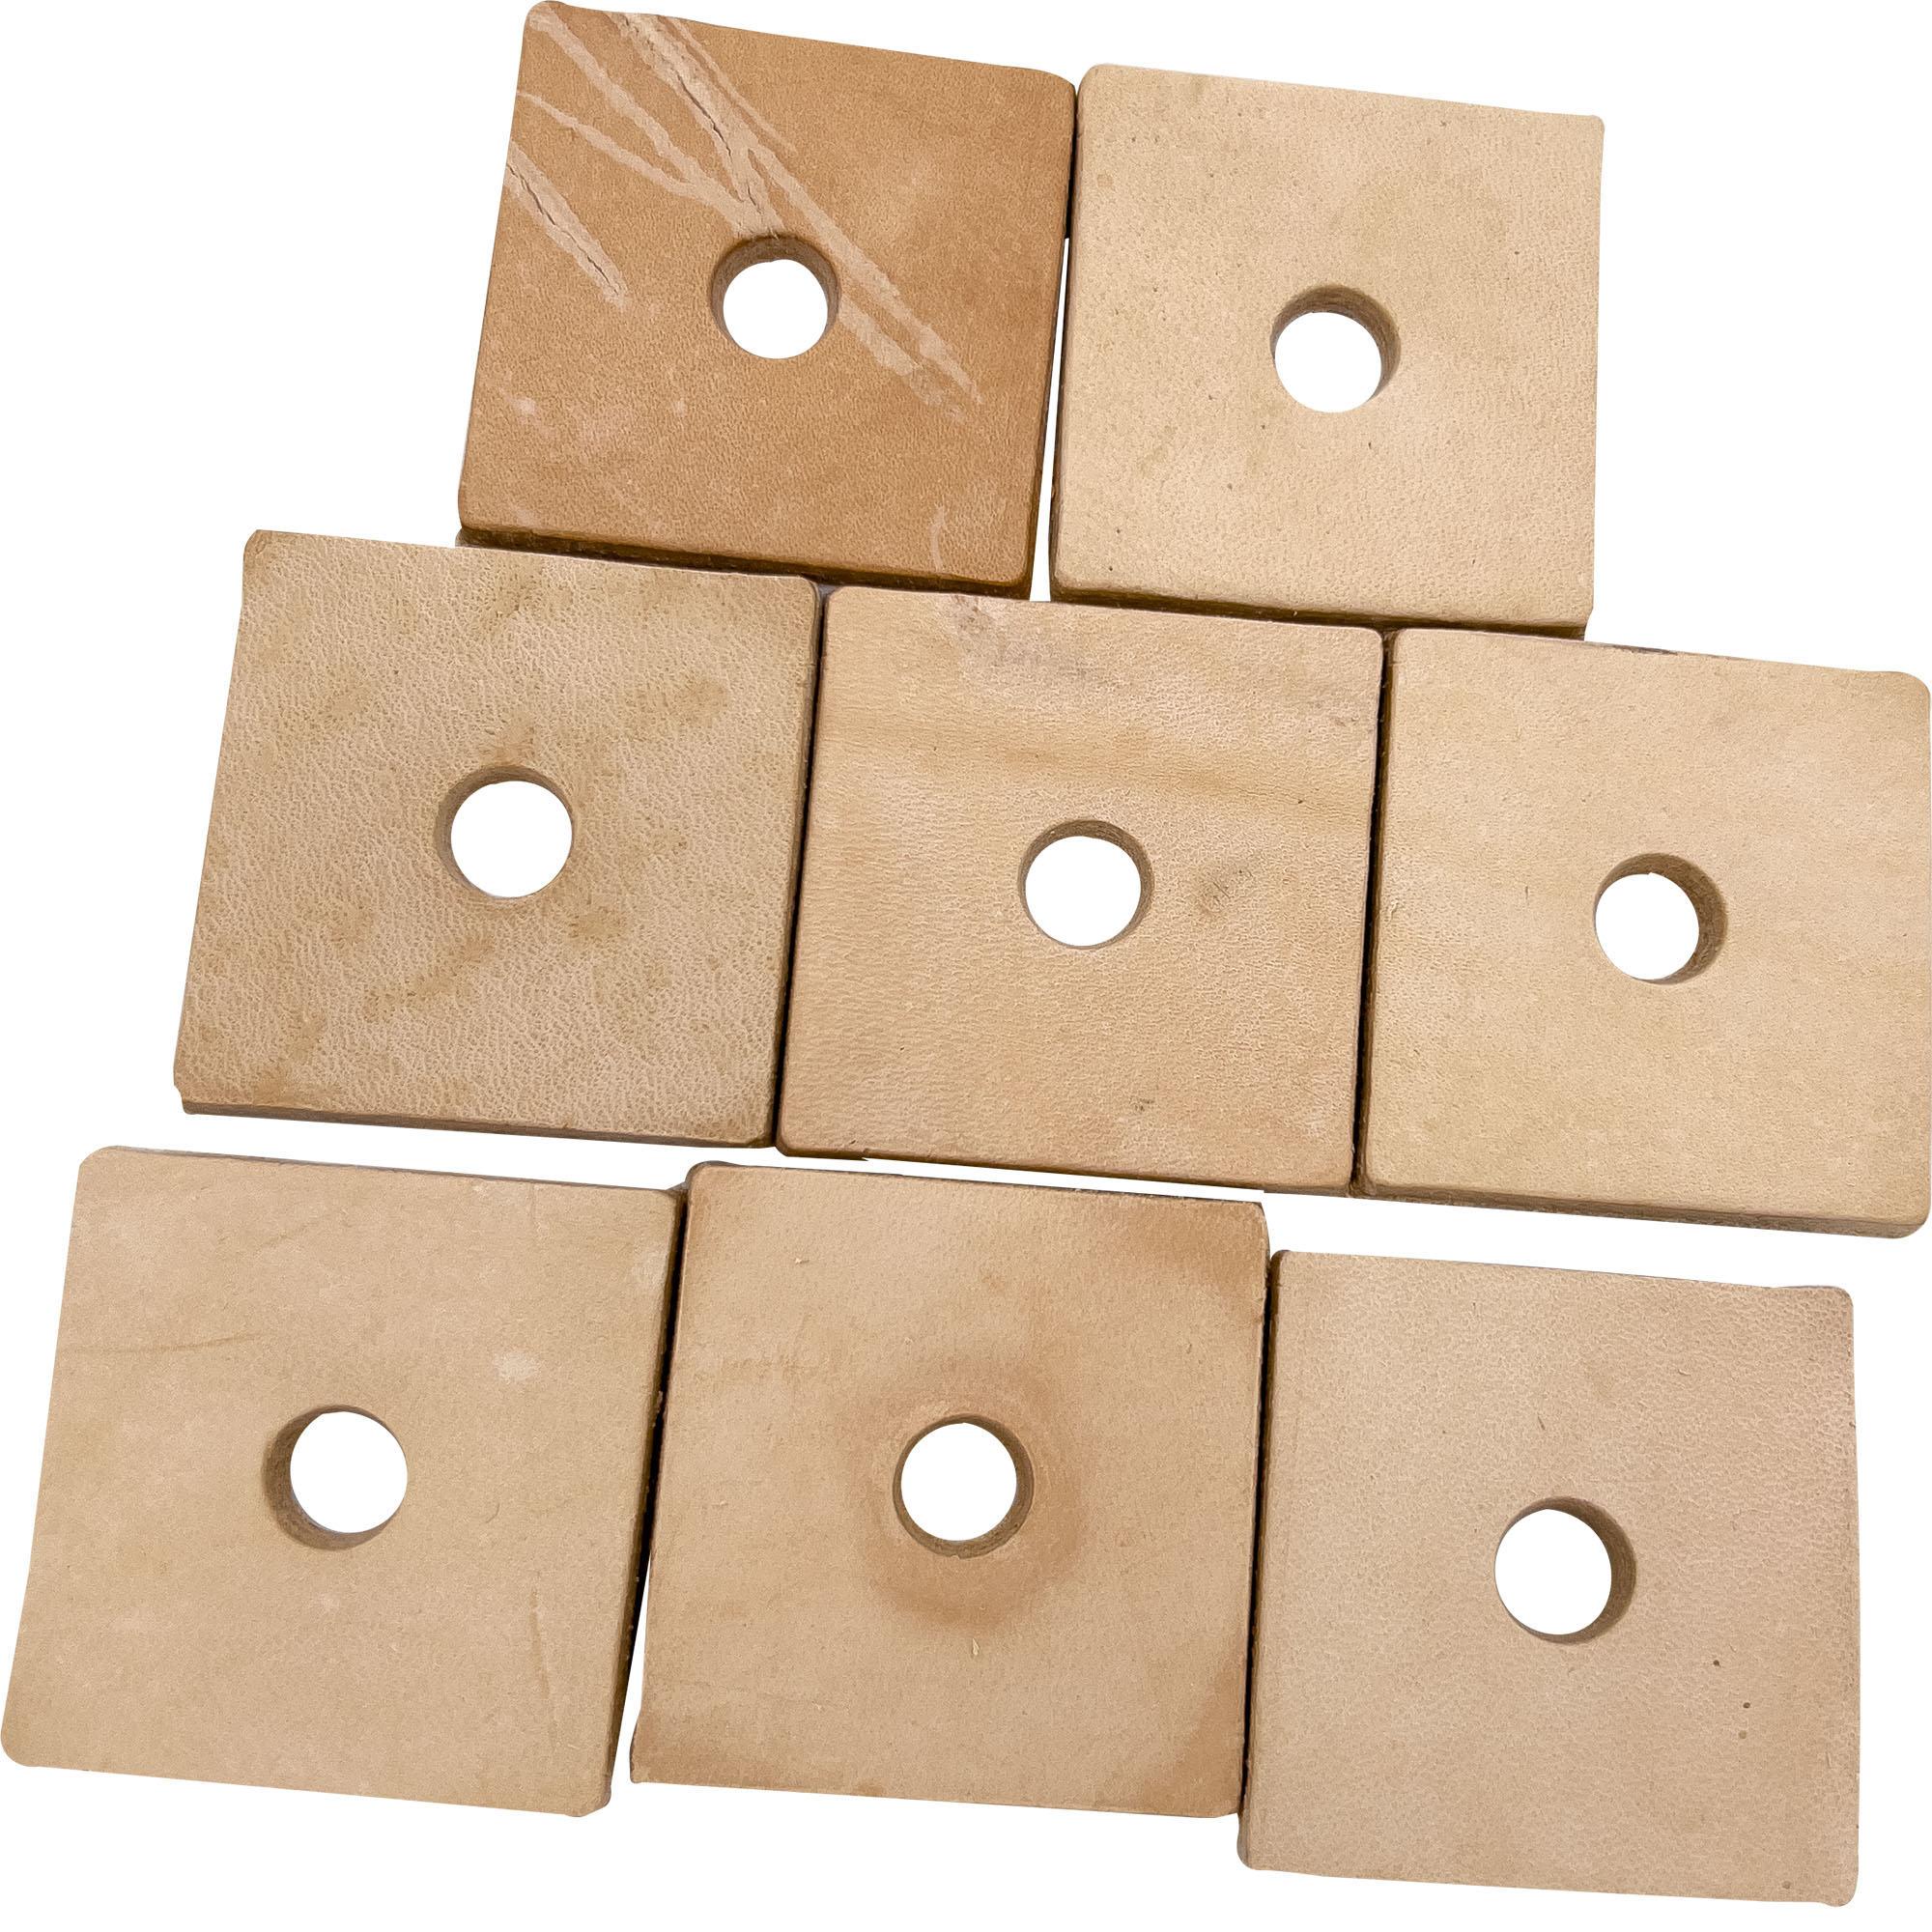 5030 Medium Punched Leather Squares